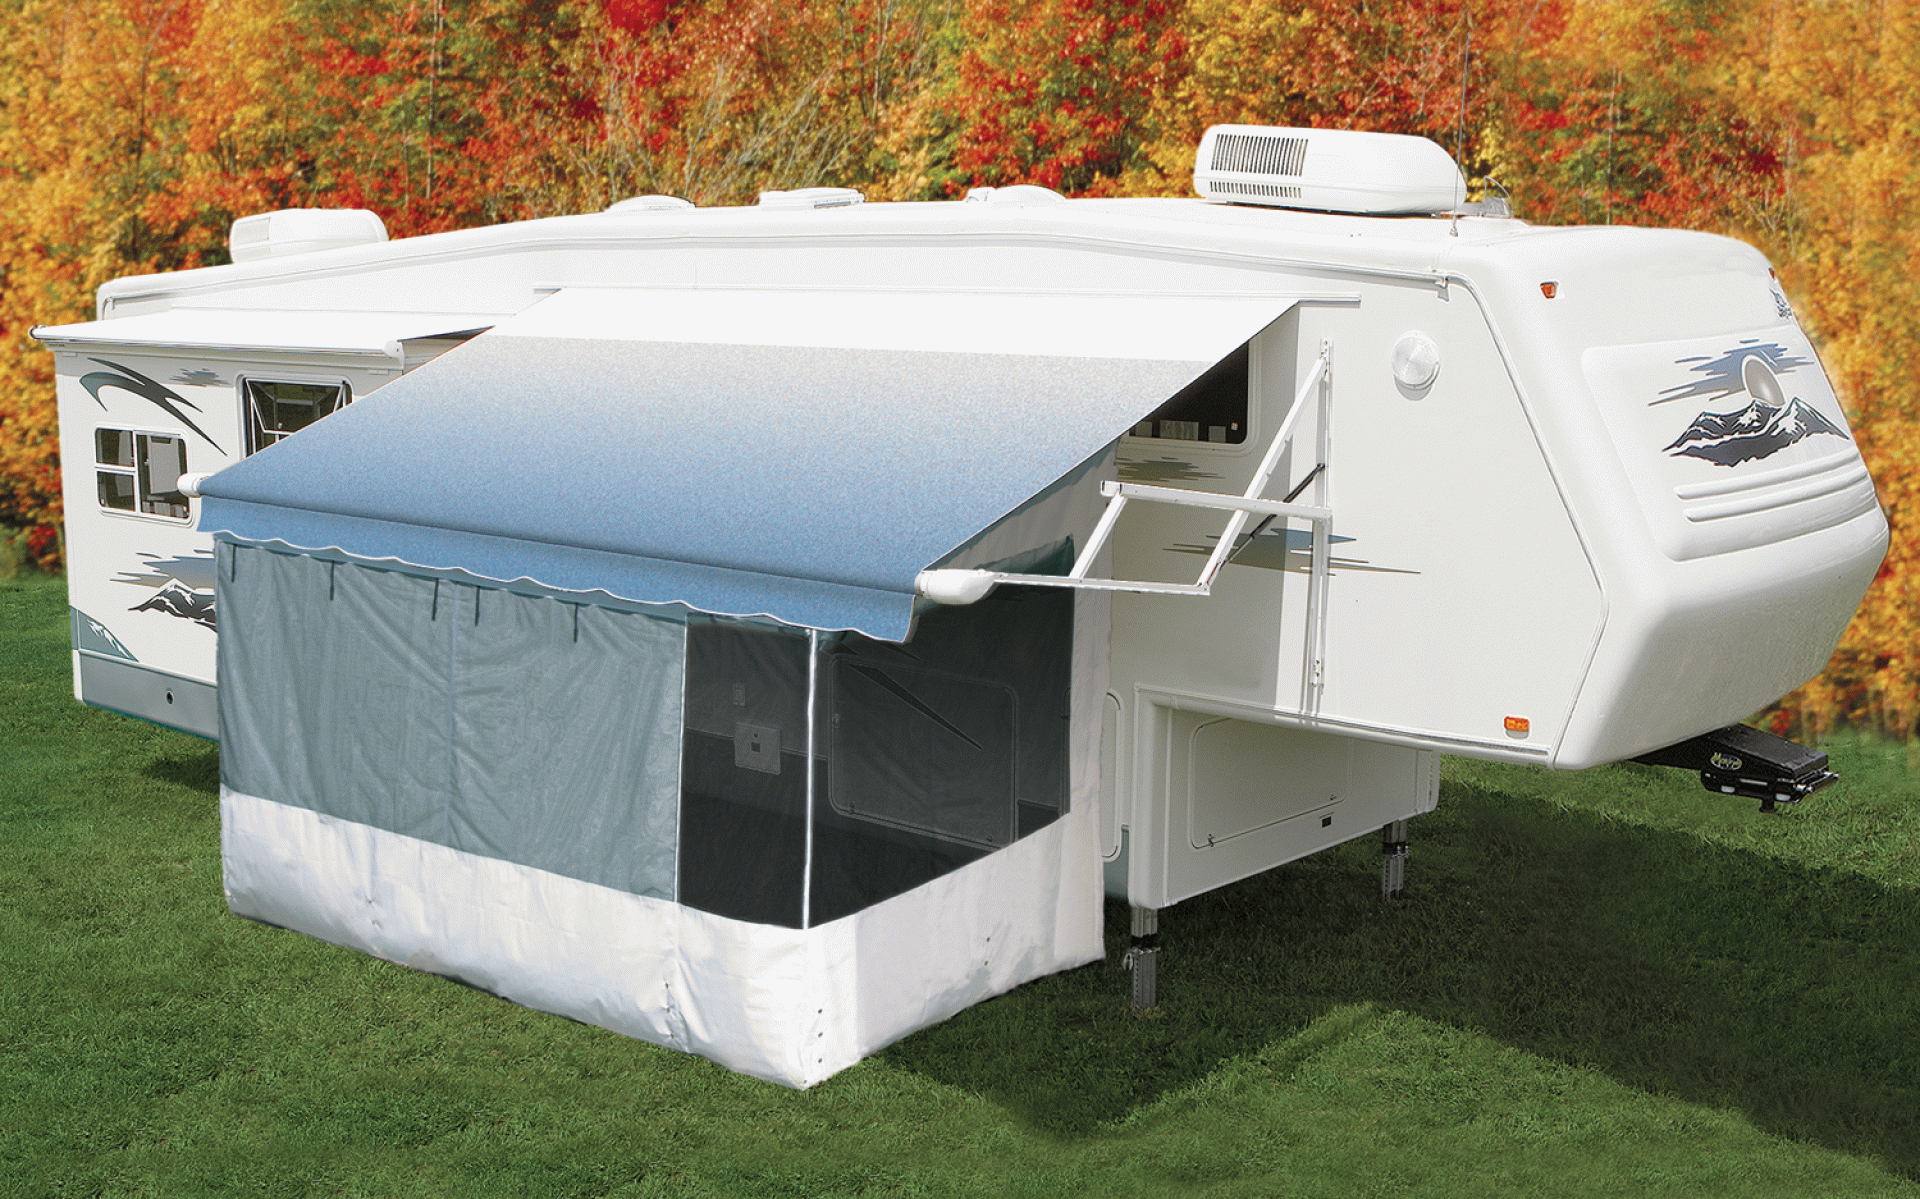 CAREFREE OF COLORADO | 711220WP | ADD-A-ROOM LTD COMPLETE 12' MANUAL AND 12V STEEP PITCH AWNING